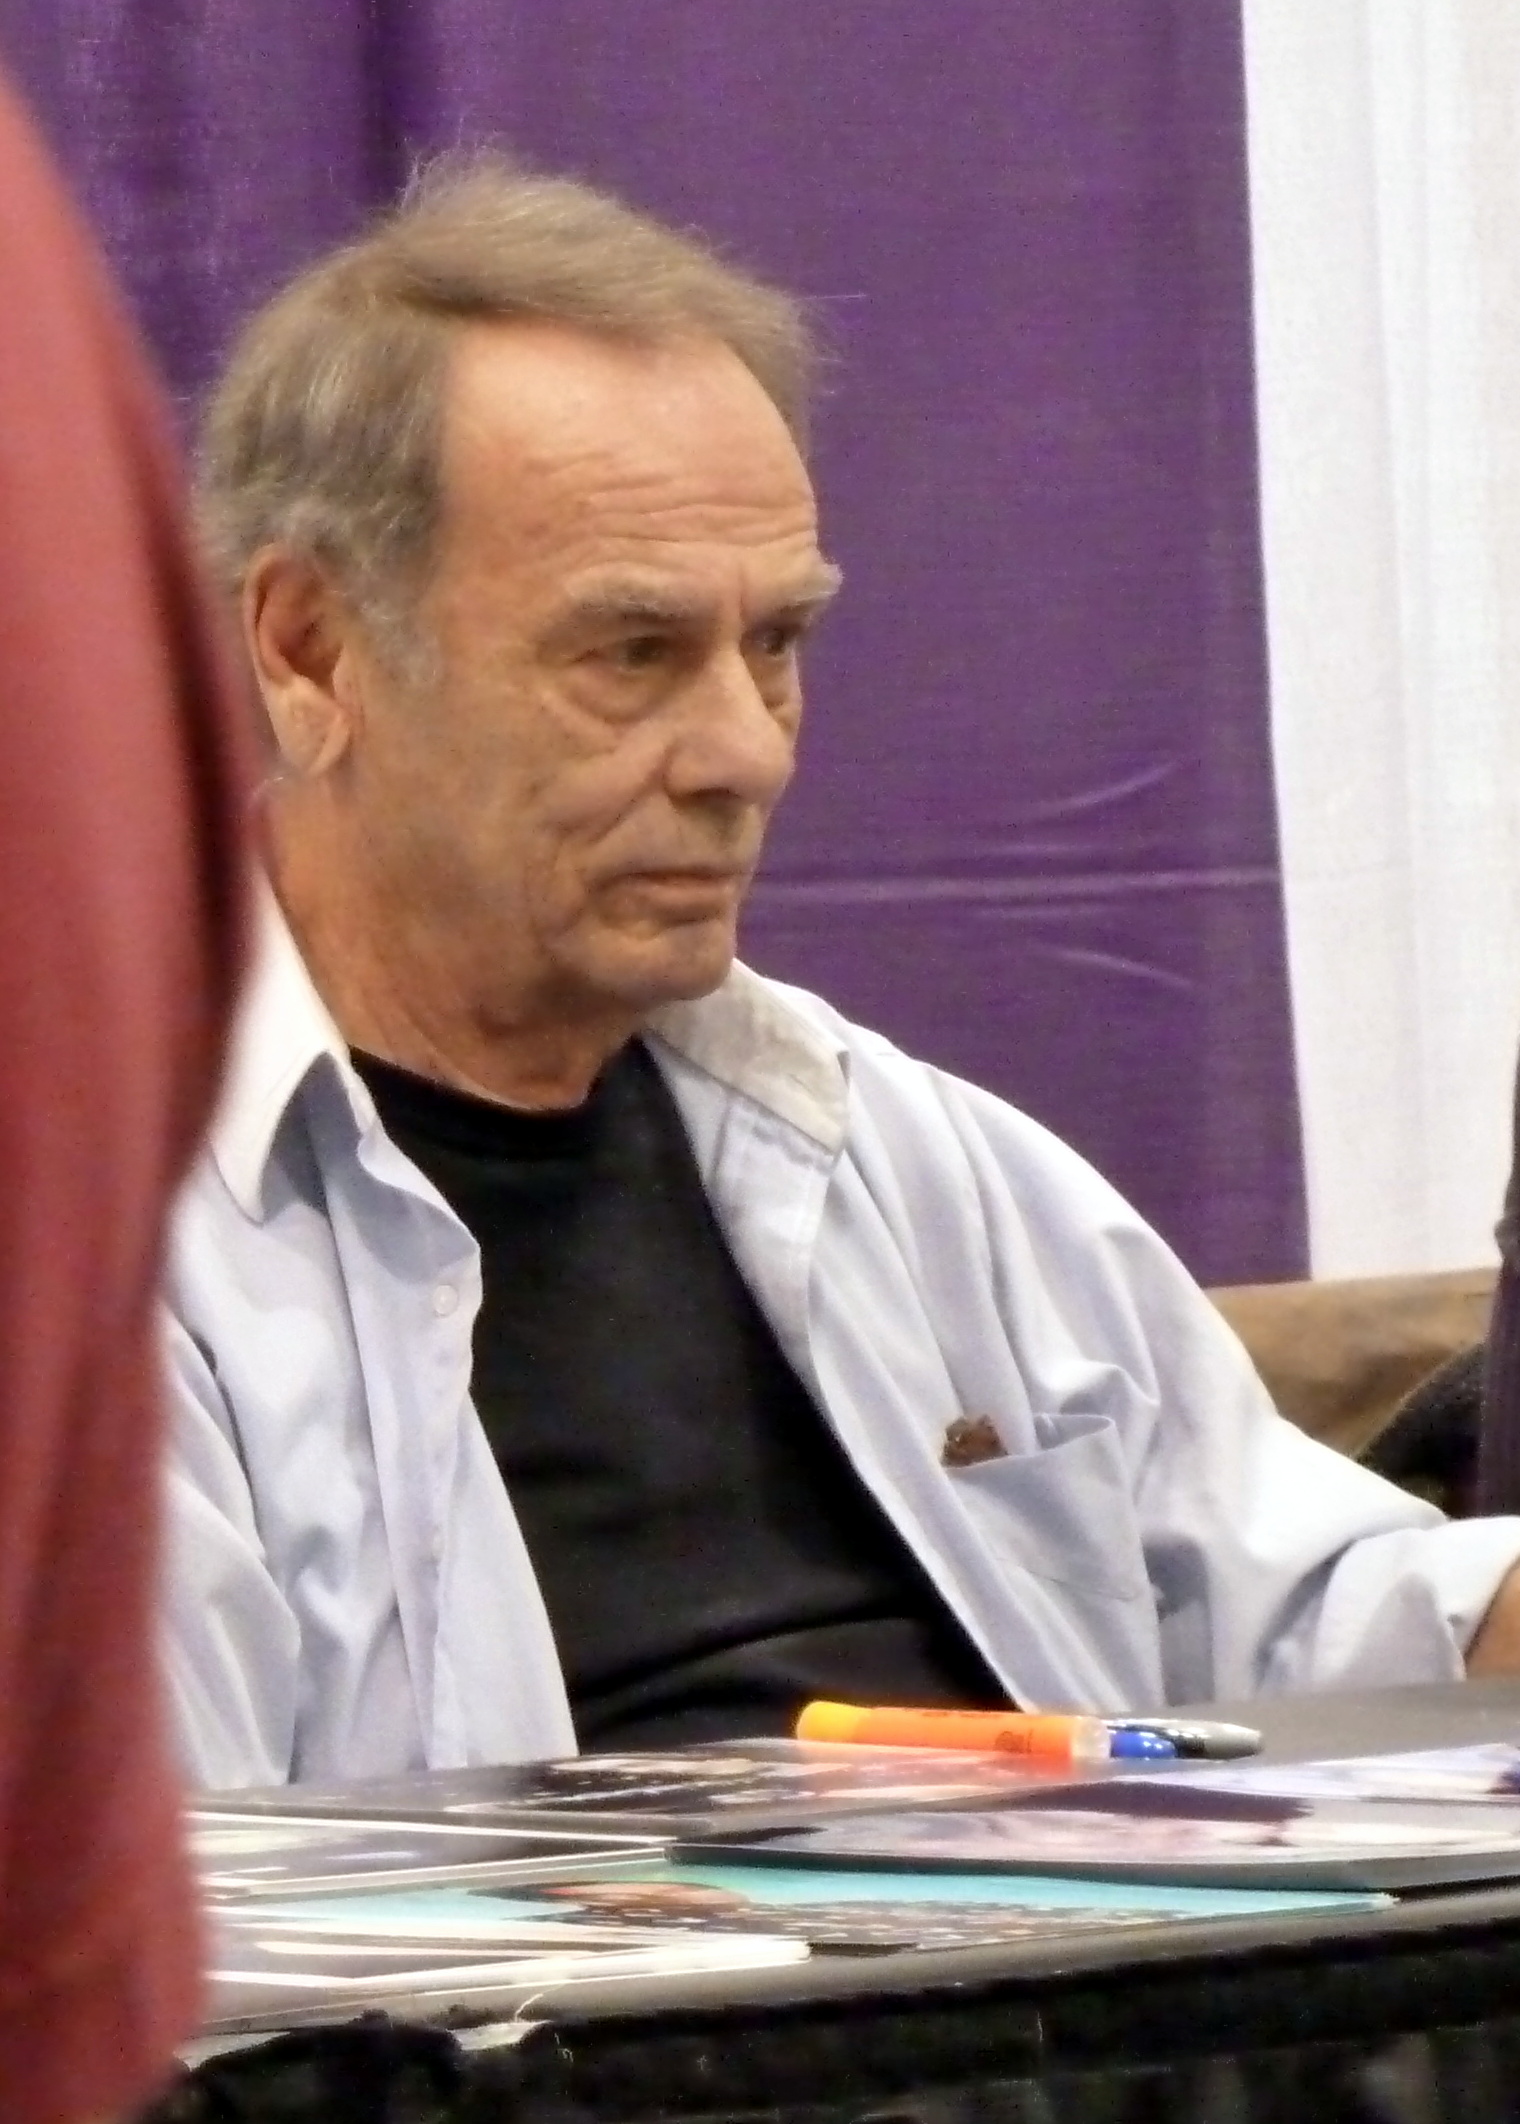 images-of-dean-stockwell